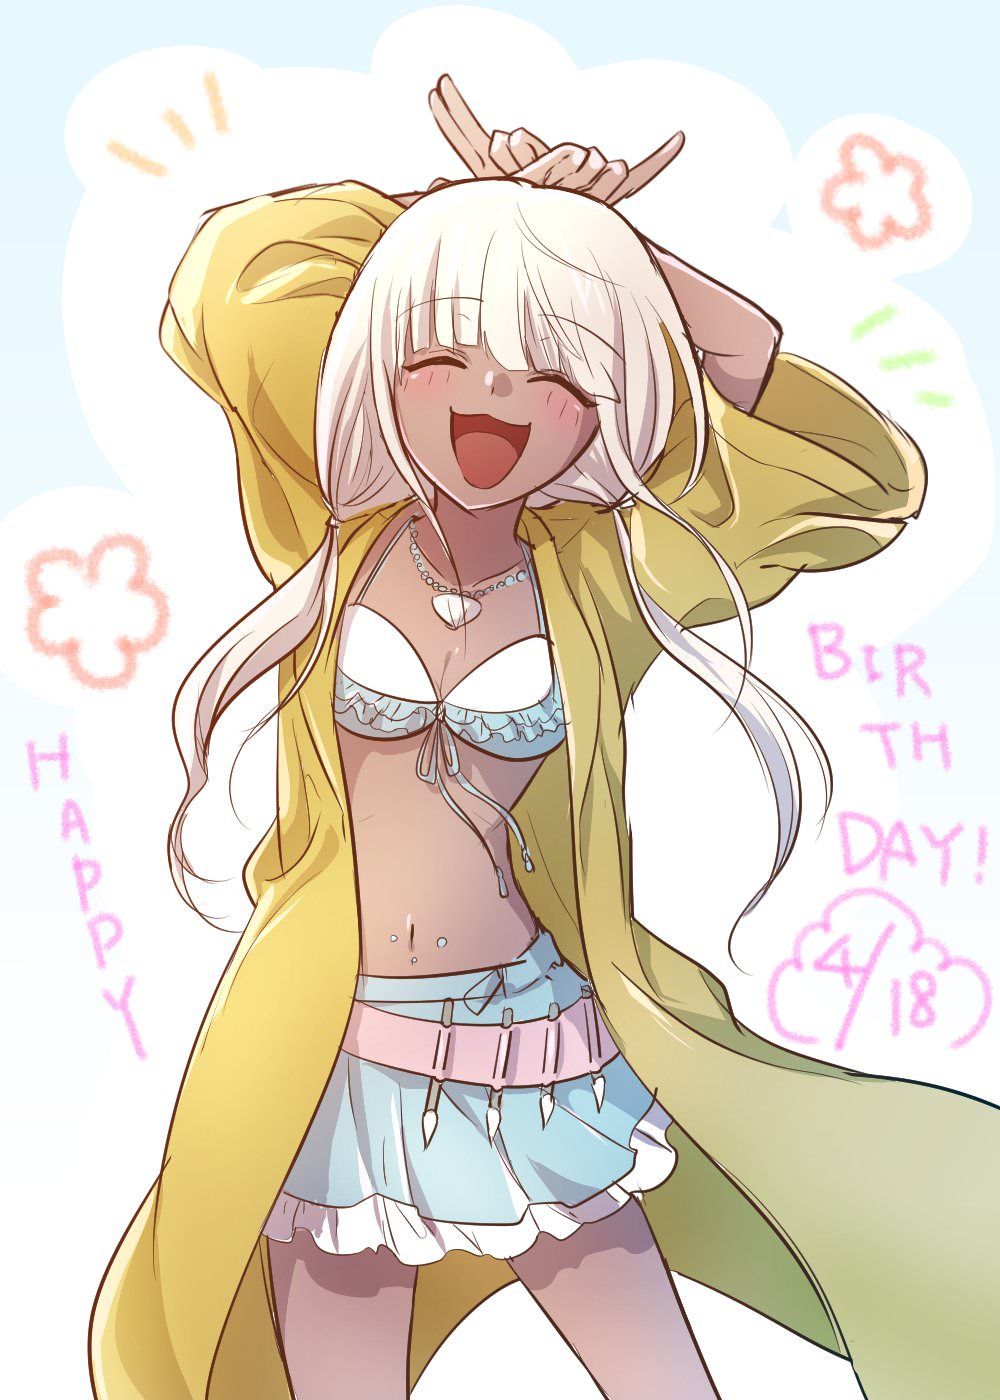 It's the 18th in Japan, so Happy Birthday Angie Yonaga!